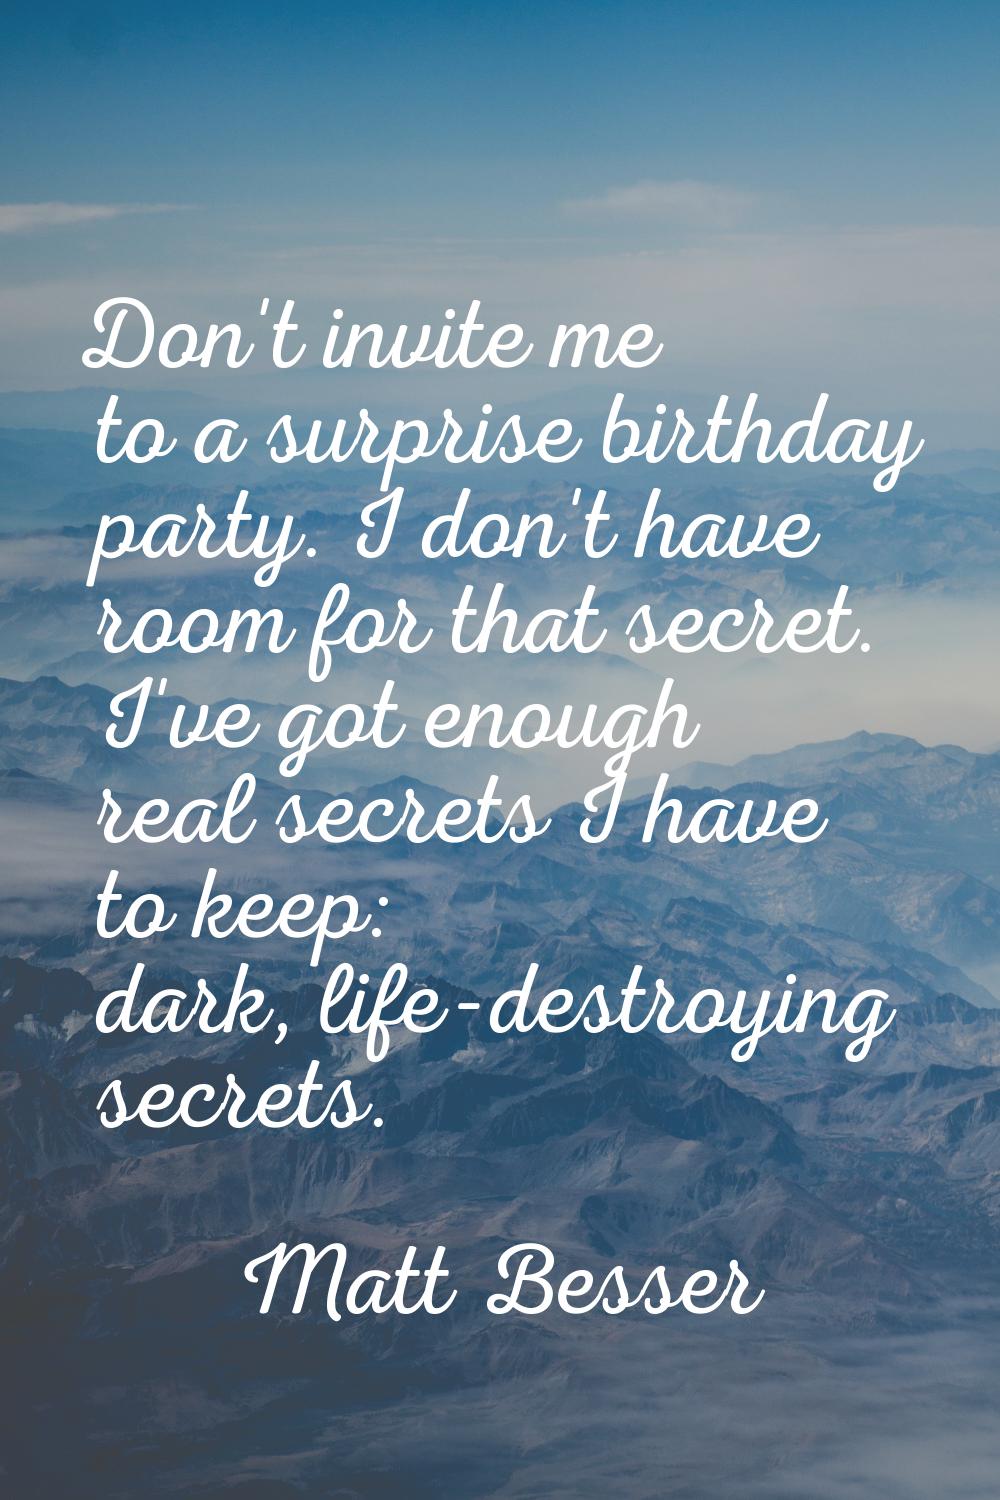 Don't invite me to a surprise birthday party. I don't have room for that secret. I've got enough re